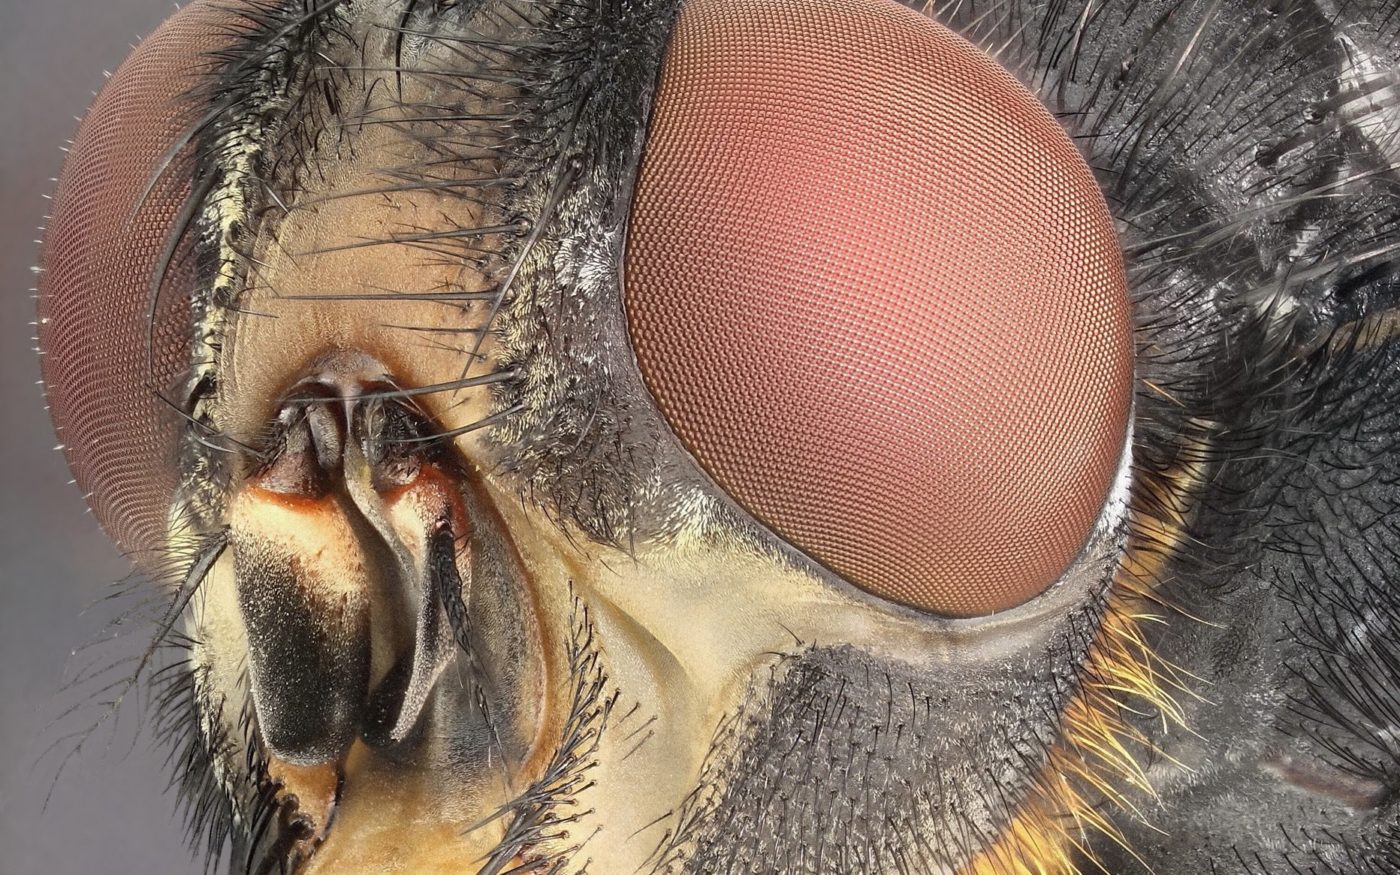 Extreme close-up of the head of a bluebottle fly (Calliphora vomitoria). This photograph is composed of a focus-stack of 250 images